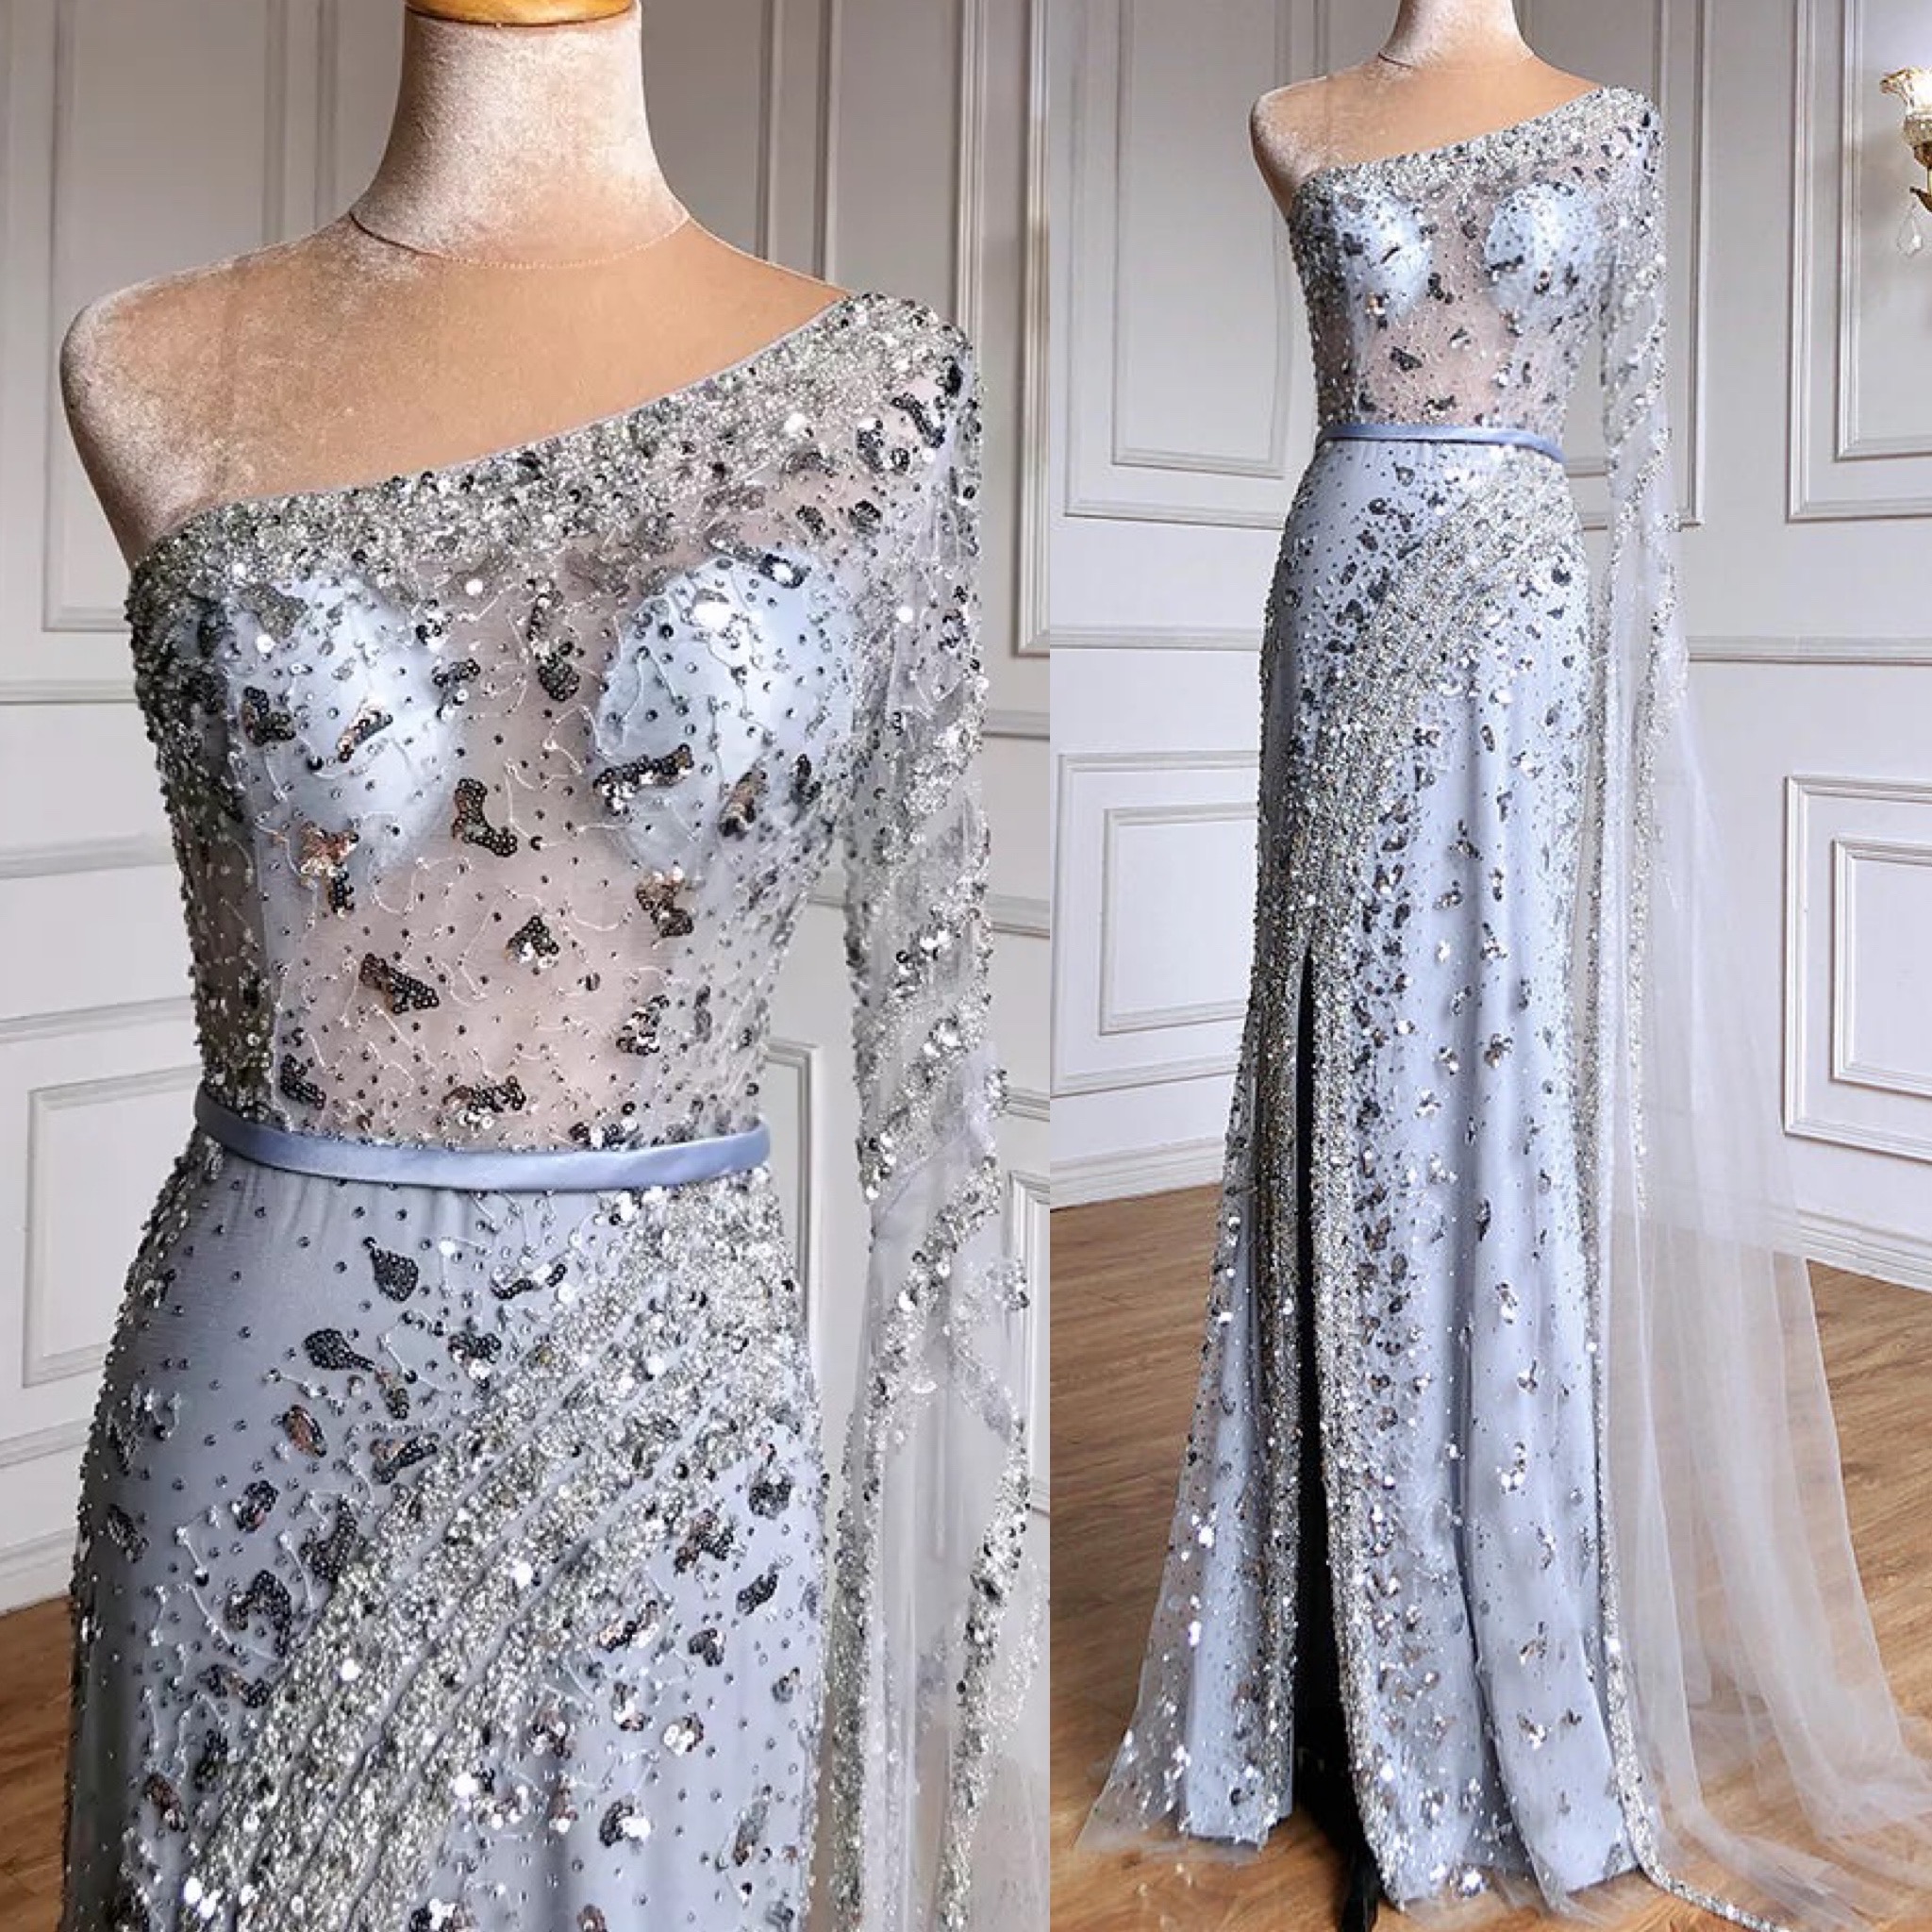 valdrinsahitiofficial | Glamour dress, Gowns dresses, Evening dresses